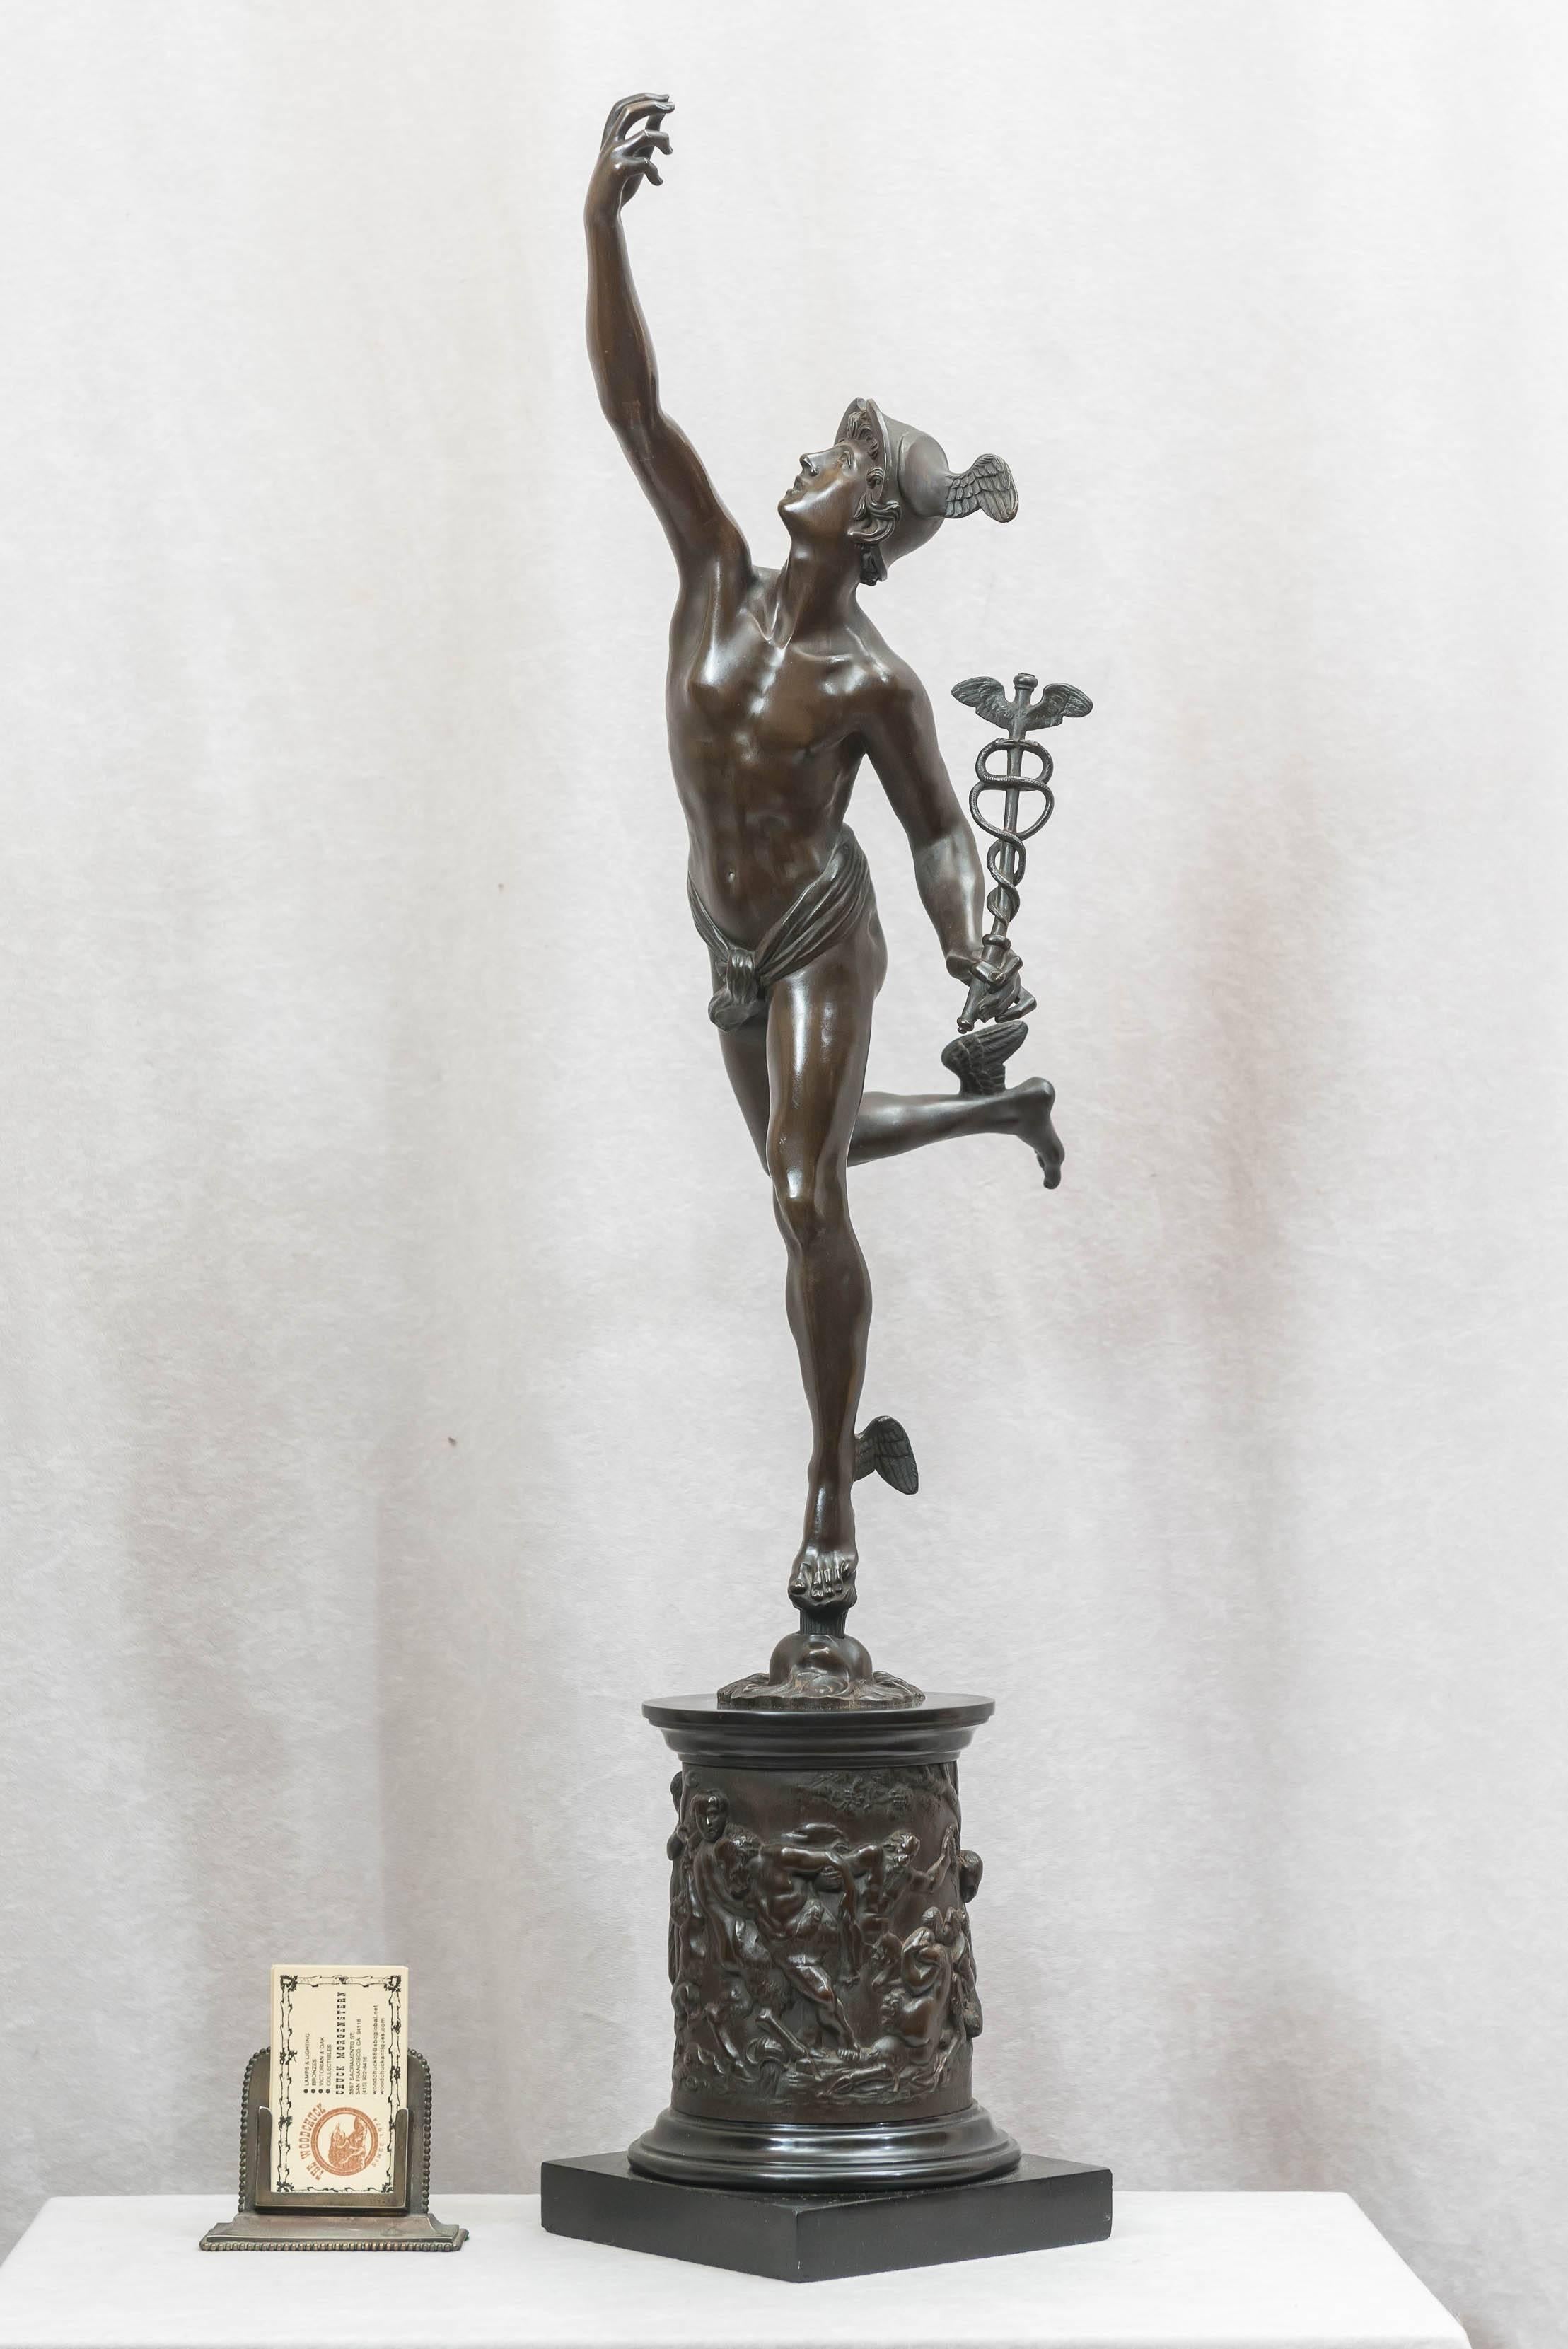 Thus is a very famous statue of Mercury, the messenger for the Roman gods. He is also known as Hermes, the Greek messenger of the gods. He holds a caduceus, which is the symbol of the medical profession. The original was sculpted in 1580 by